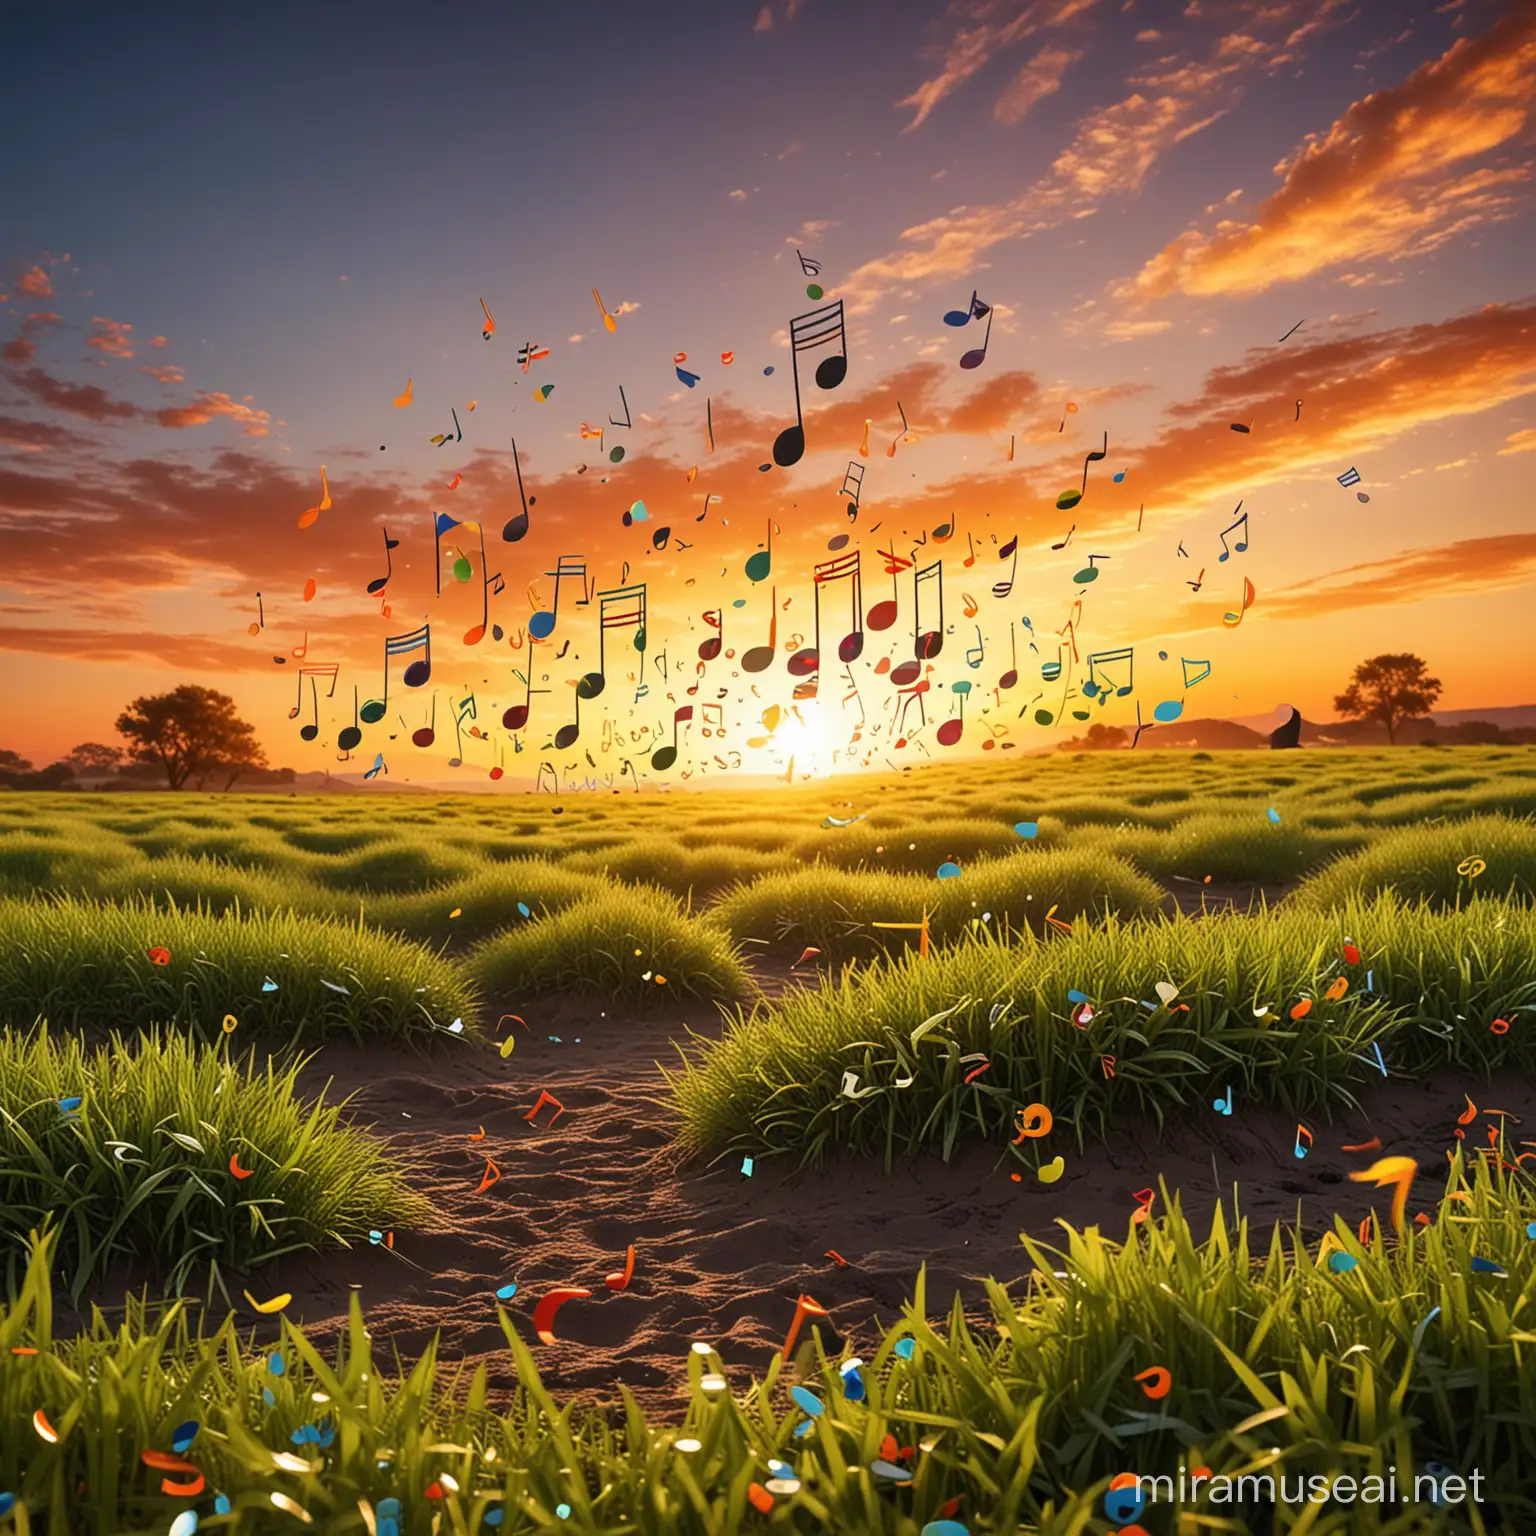 Grass on the bottom with sunrise in the back. colorful musical notes scattered around in the sunrise sky.

